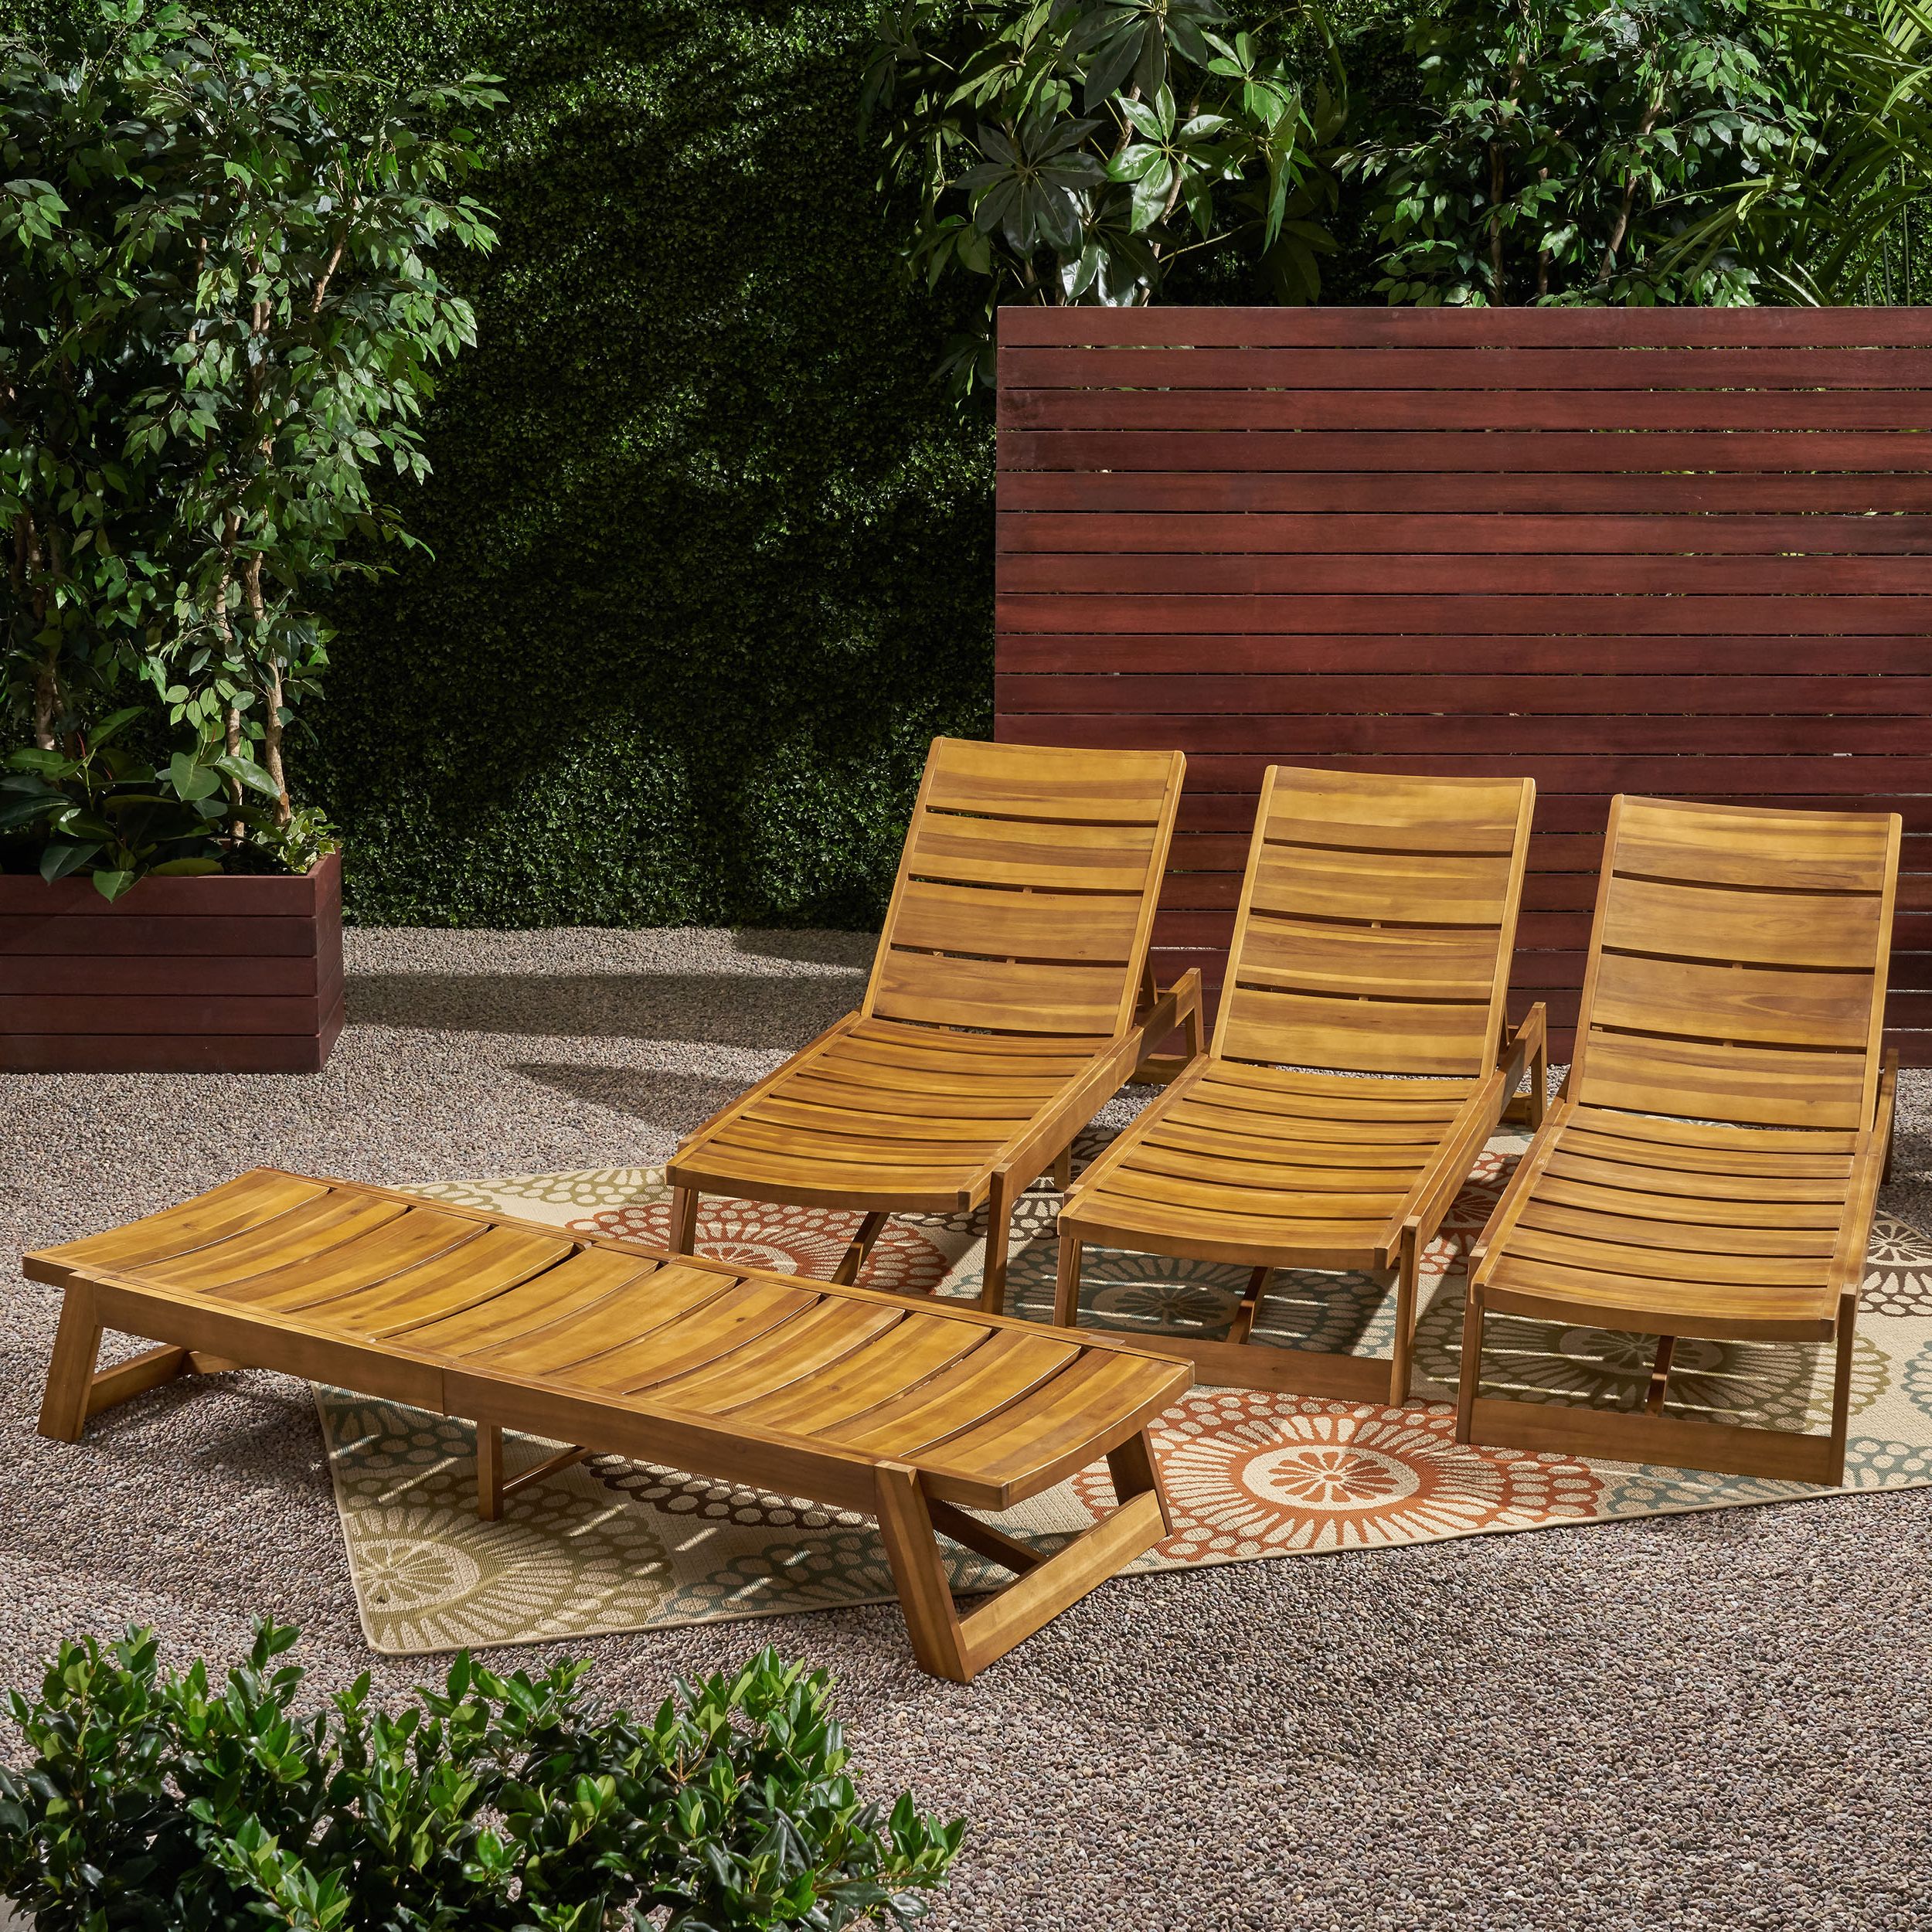 Outdoor Acacia Wood Chaise Lounges And Cushion Sets With Latest Details About Melissa Outdoor Acacia Wood Chaise Lounge (set Of 4) (View 14 of 25)